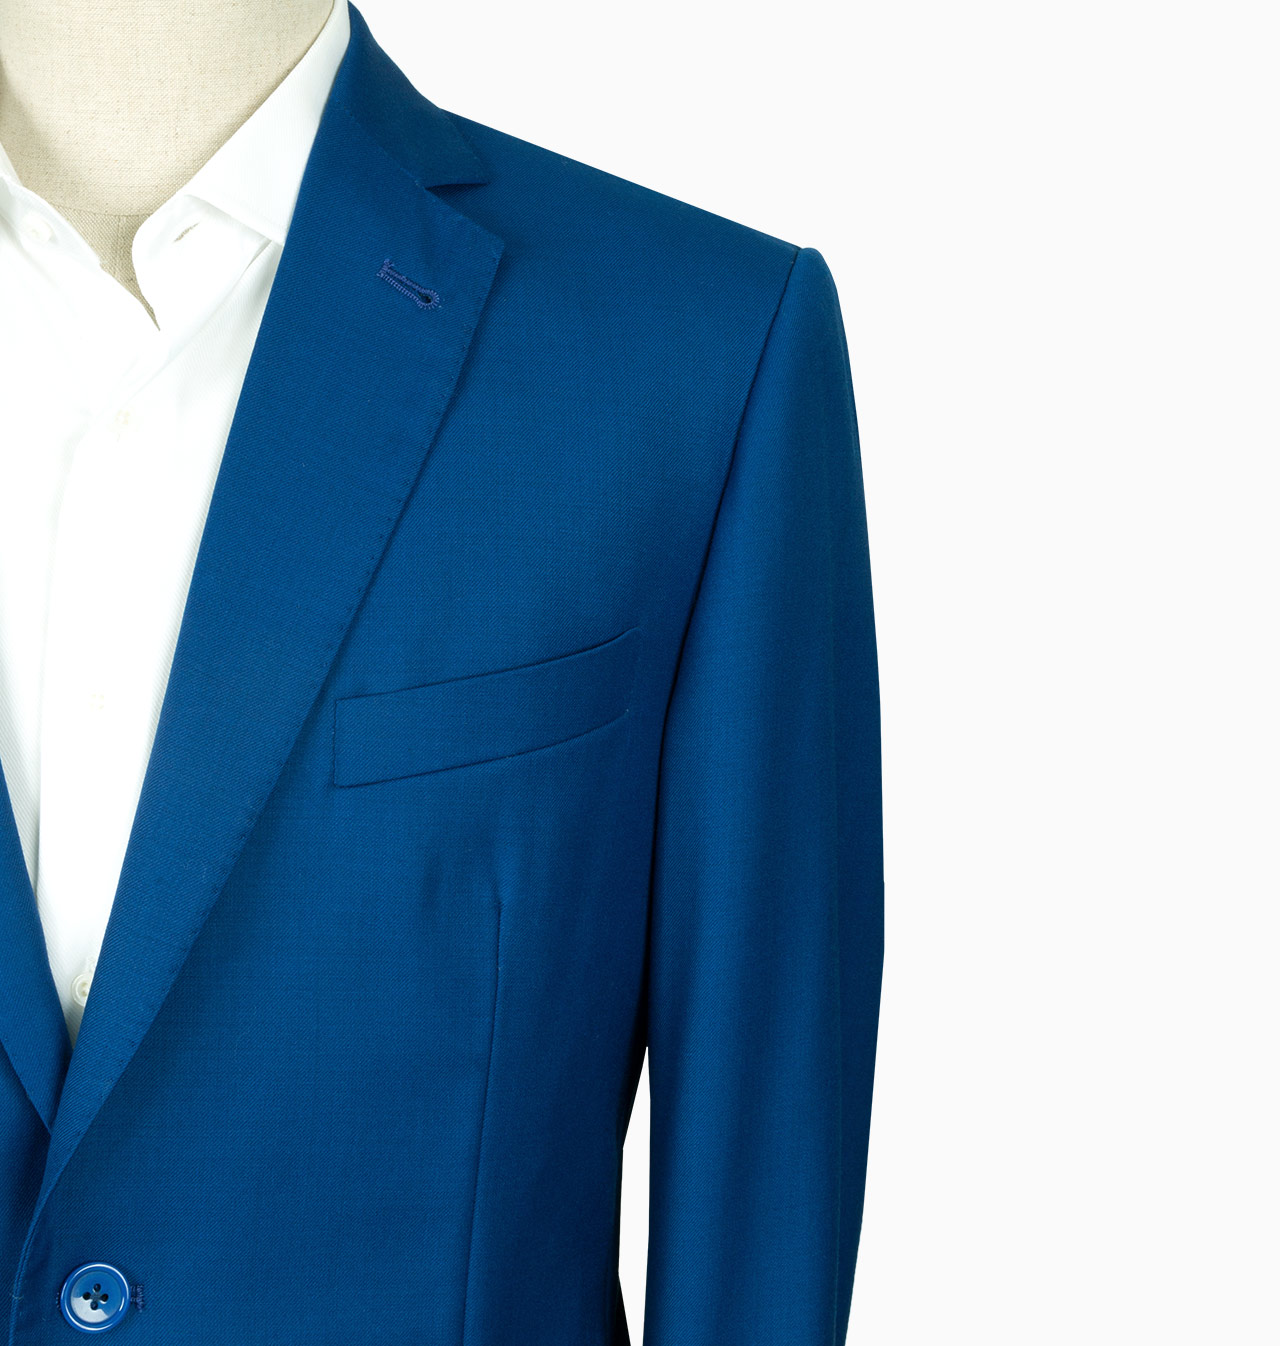 Cobalt Twill / S1622 - Suiting